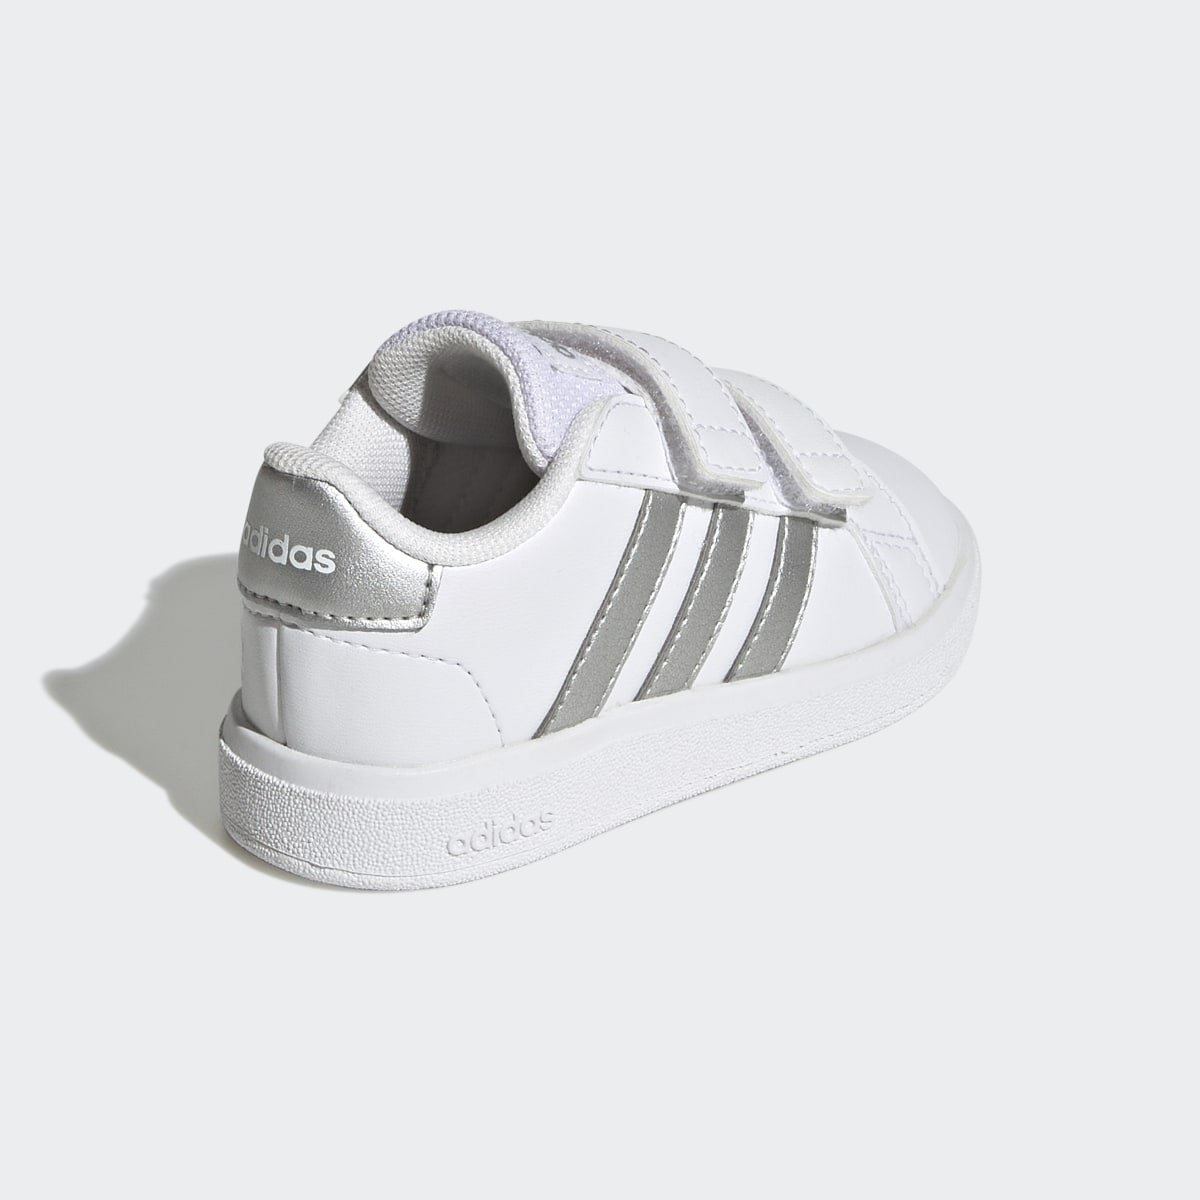 Adidas Grand Court Lifestyle Hook and Loop Schuh. 6